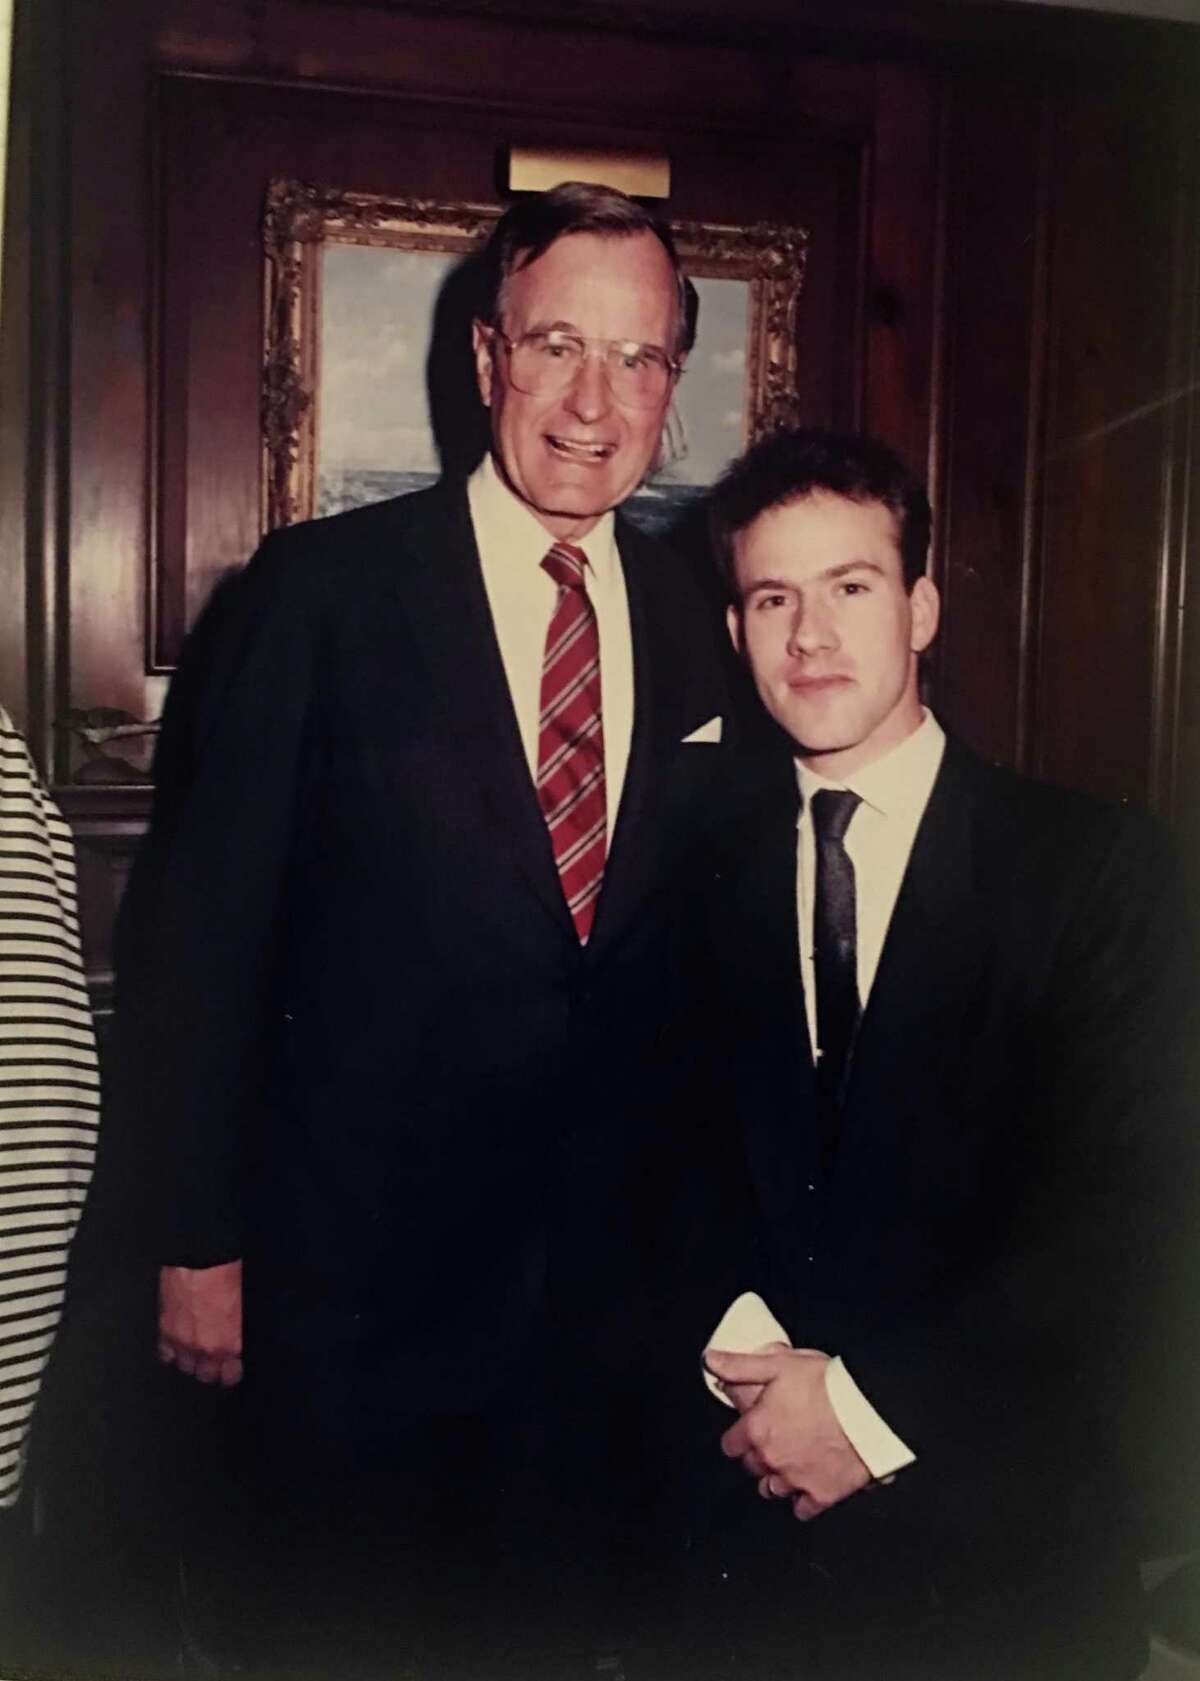 The nation’s 41st president, George H.W. Bush, poses with photographer-at-large and musician Bob Capazzo in Greenwich in 1988.